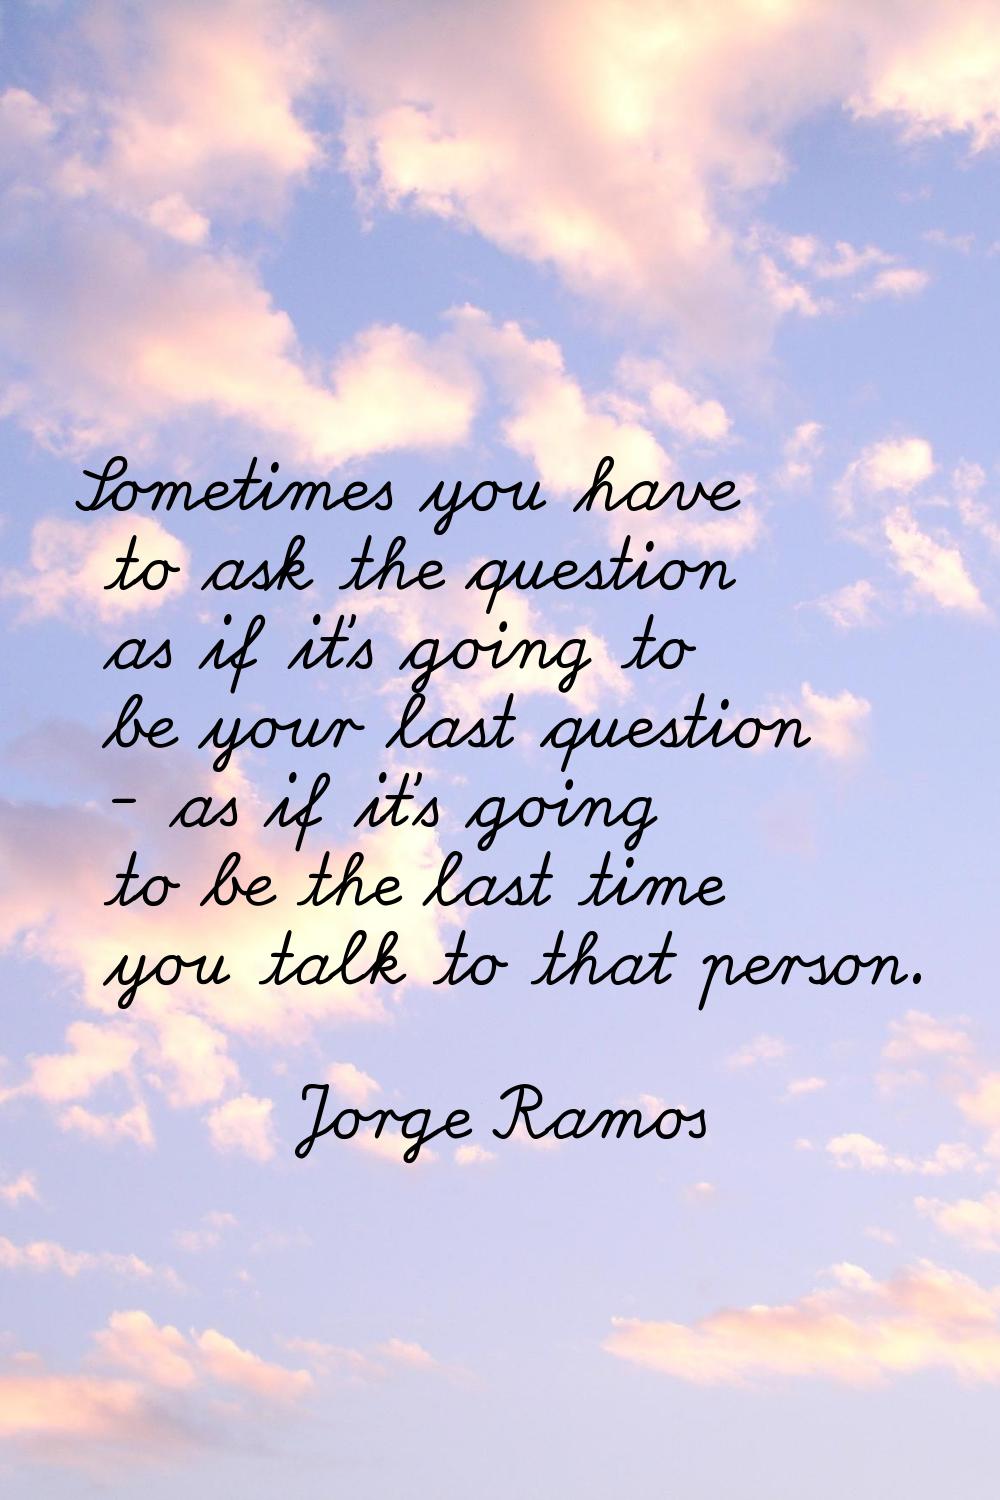 Sometimes you have to ask the question as if it's going to be your last question - as if it's going